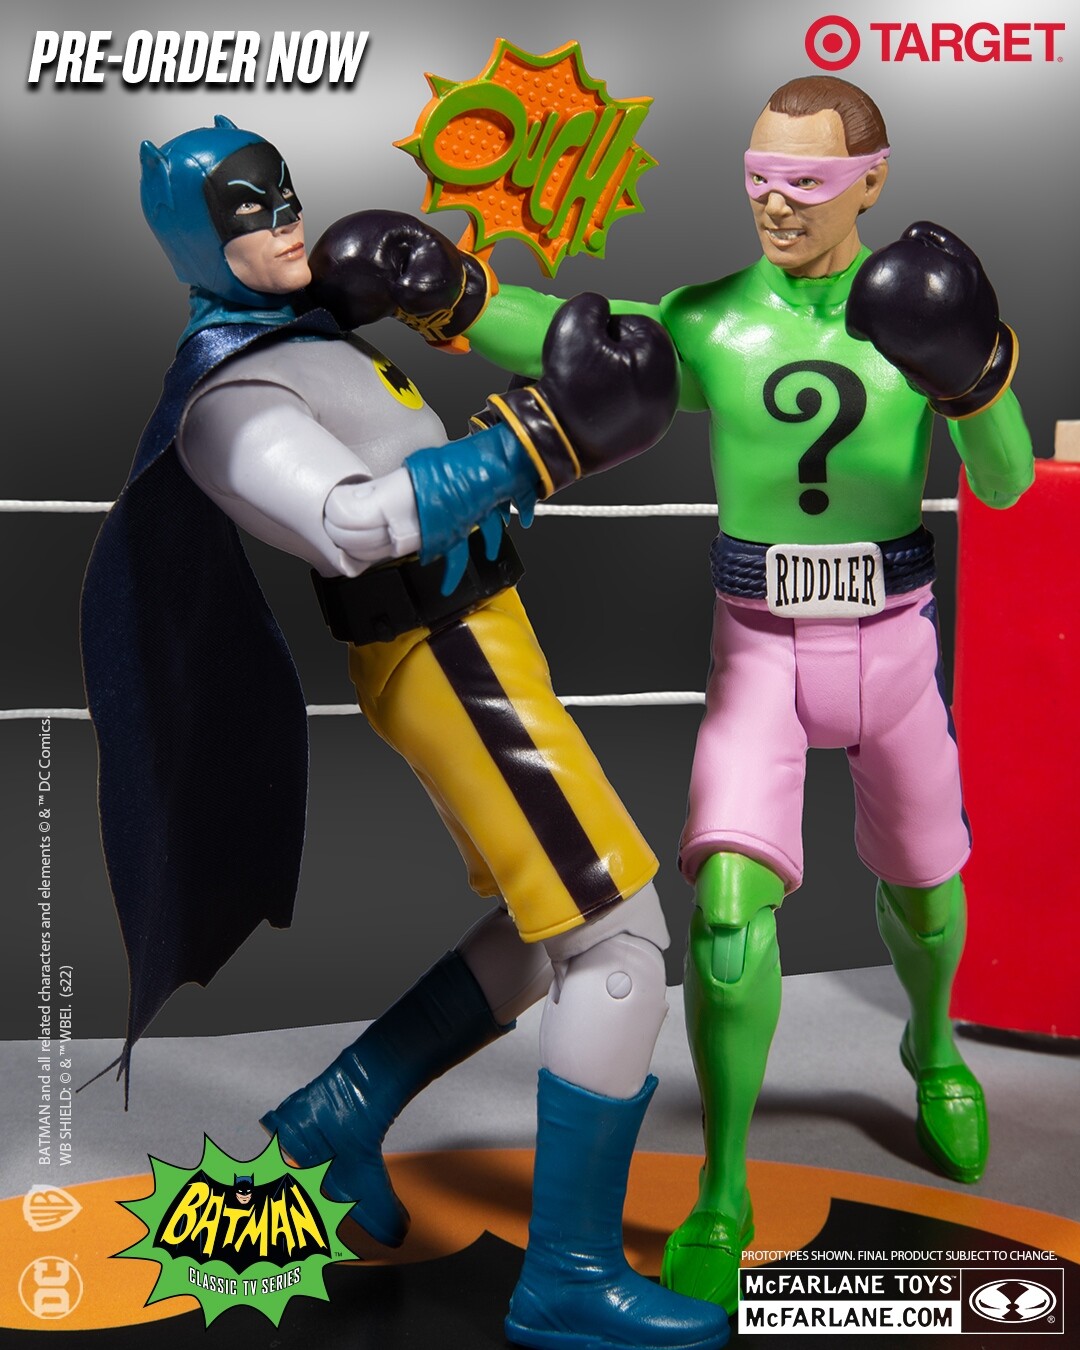 Batman 66 Boxing Batman and Joke - I helped sculpt the boxing gloves and with the engineering revisions to make them work on the figures.